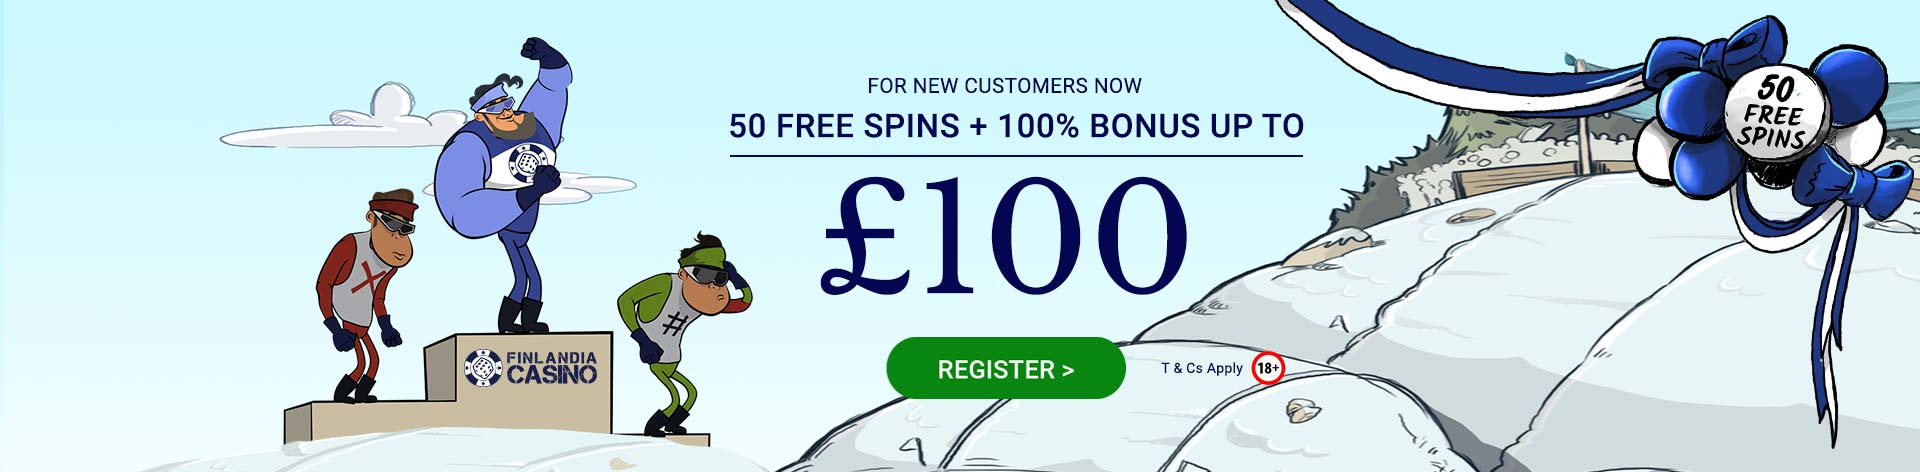 For new customers now 50 Free Spins + 100 % Bonus up to £100.